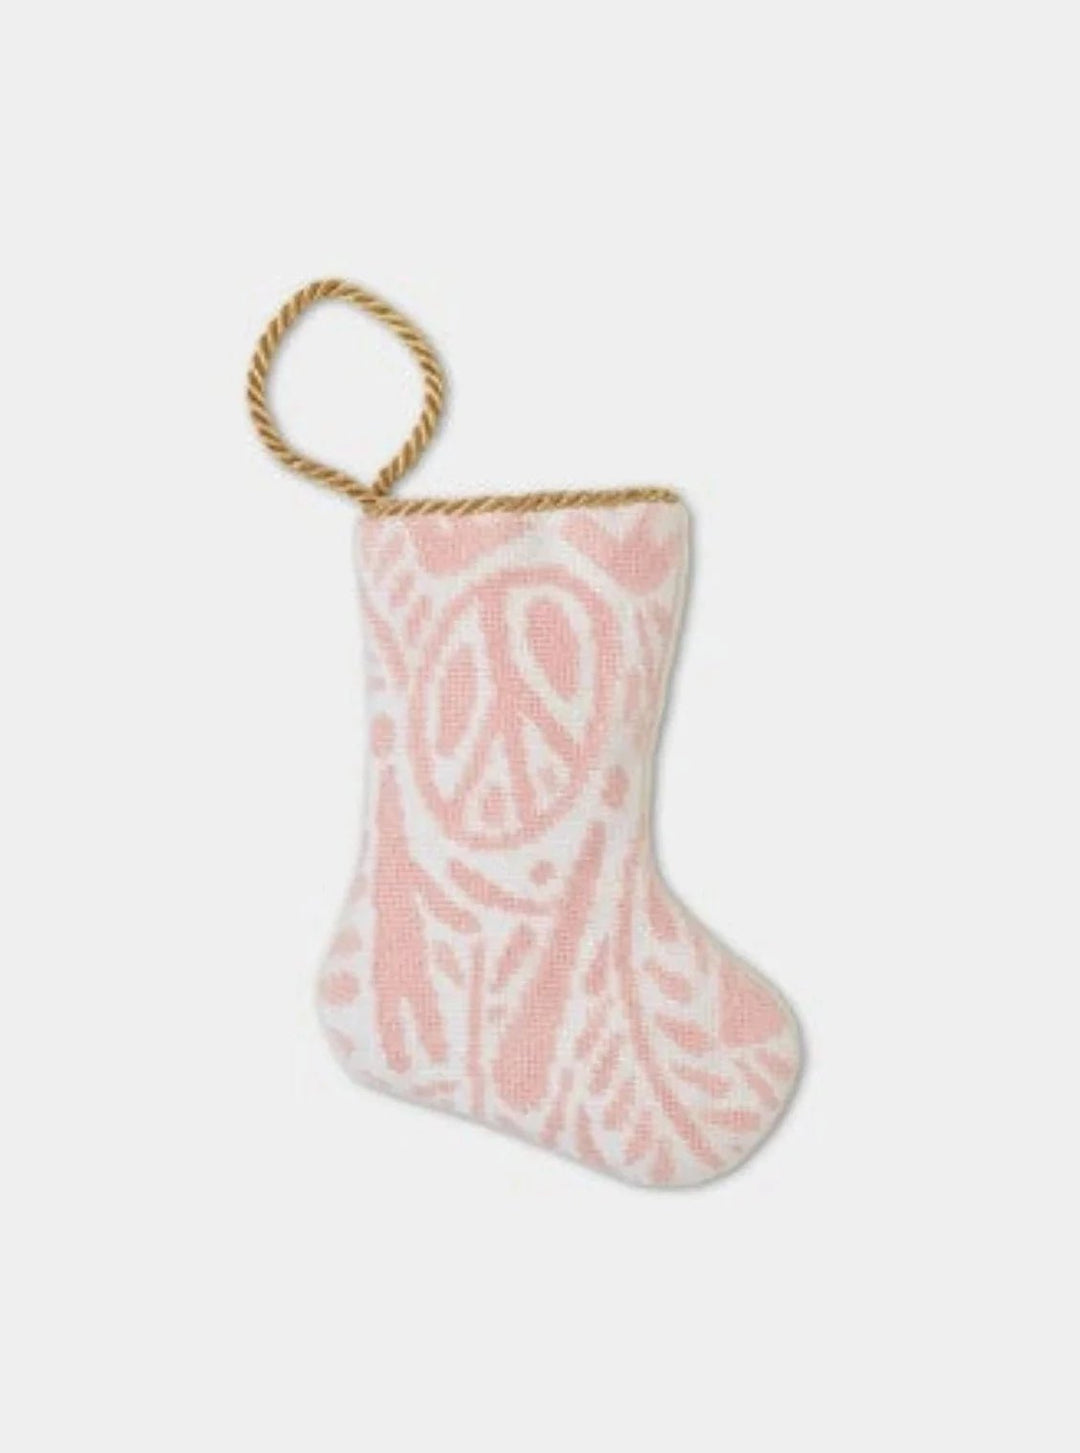 Bauble Stockings Bauble Stocking Bauble Stockings | Peace Love and Joy in Pink